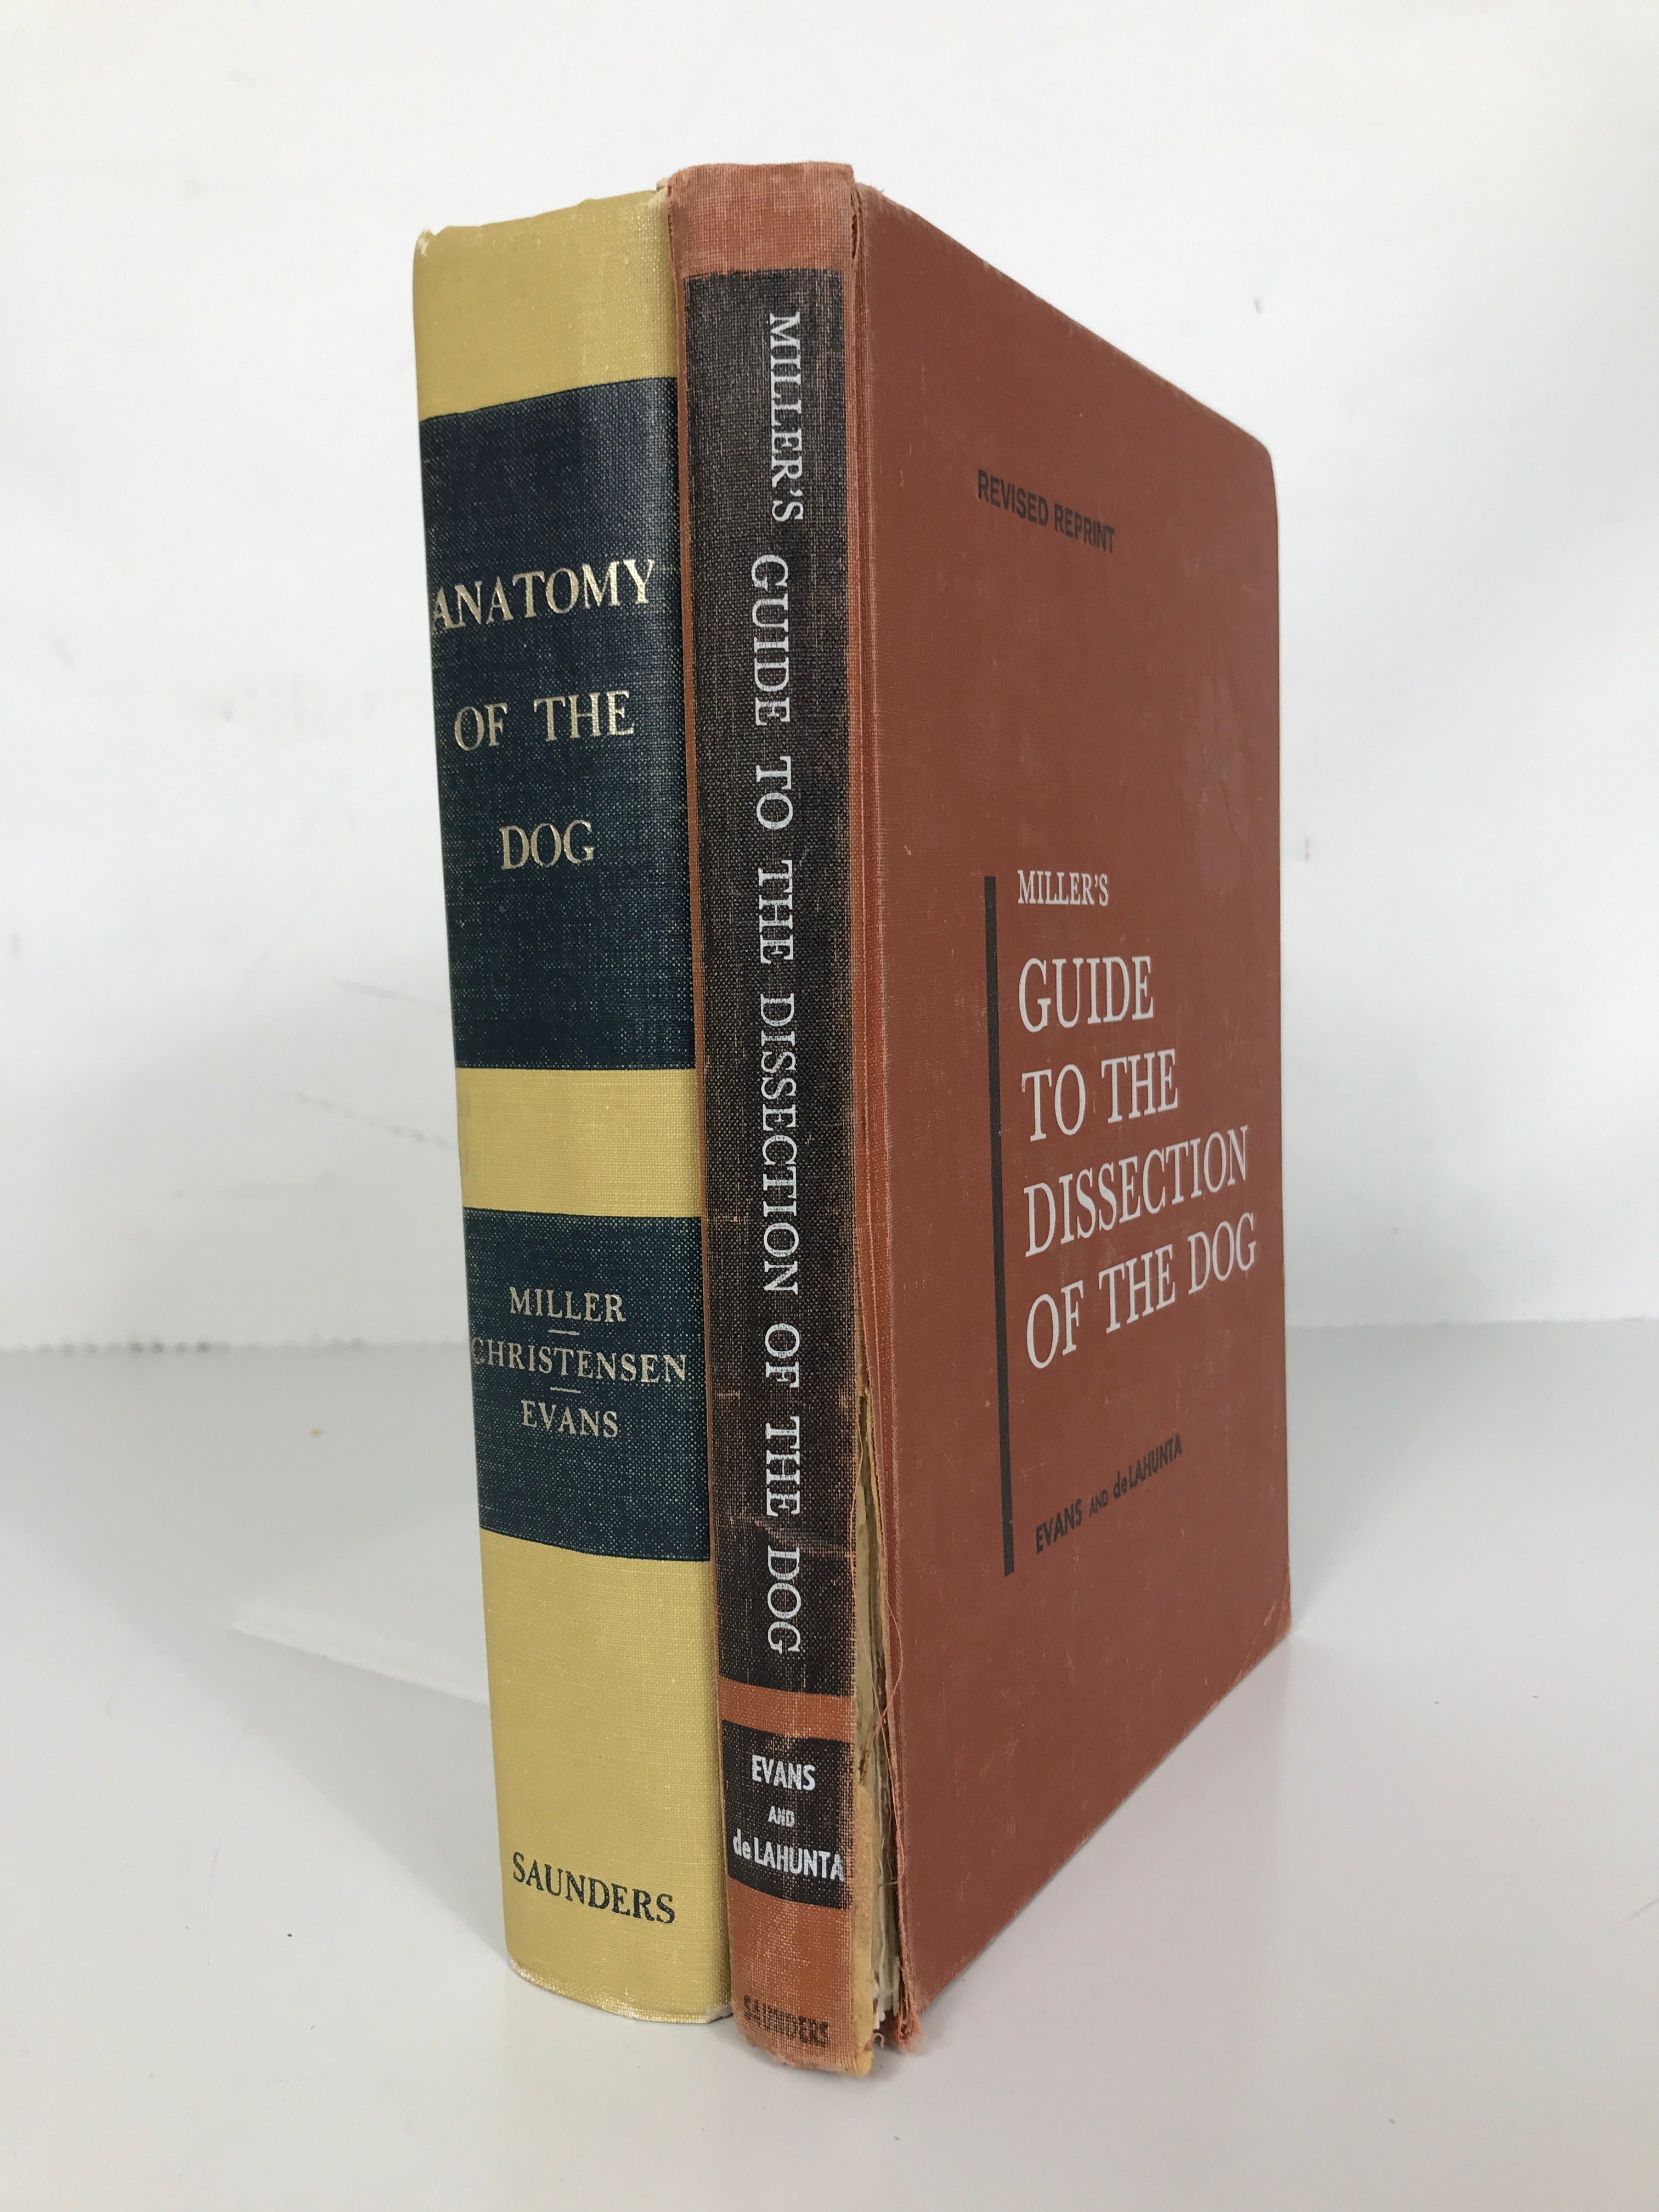 Lot of 2: Anatomy of the Dog 1964 / Guide to the Dissection of the Dog 1971 HC